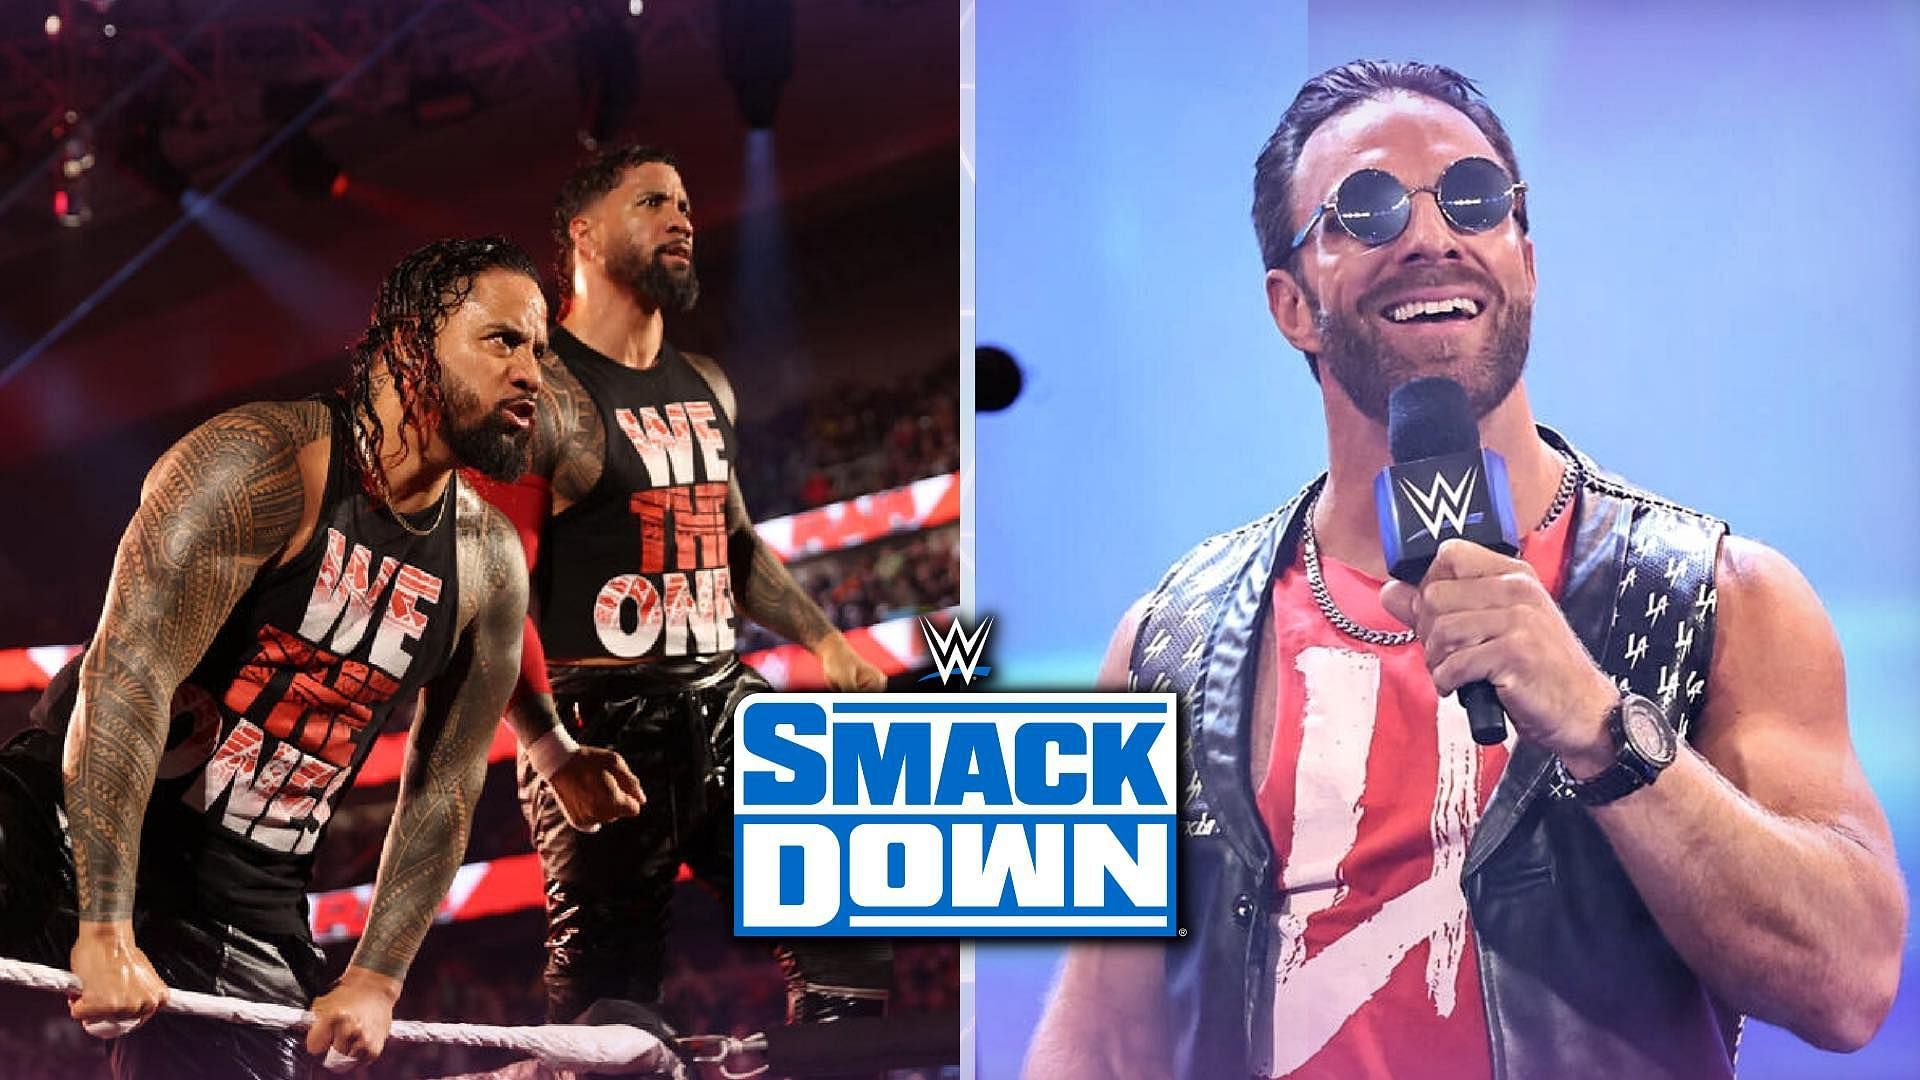 WWE SmackDown has multiple exciting events to look forward to